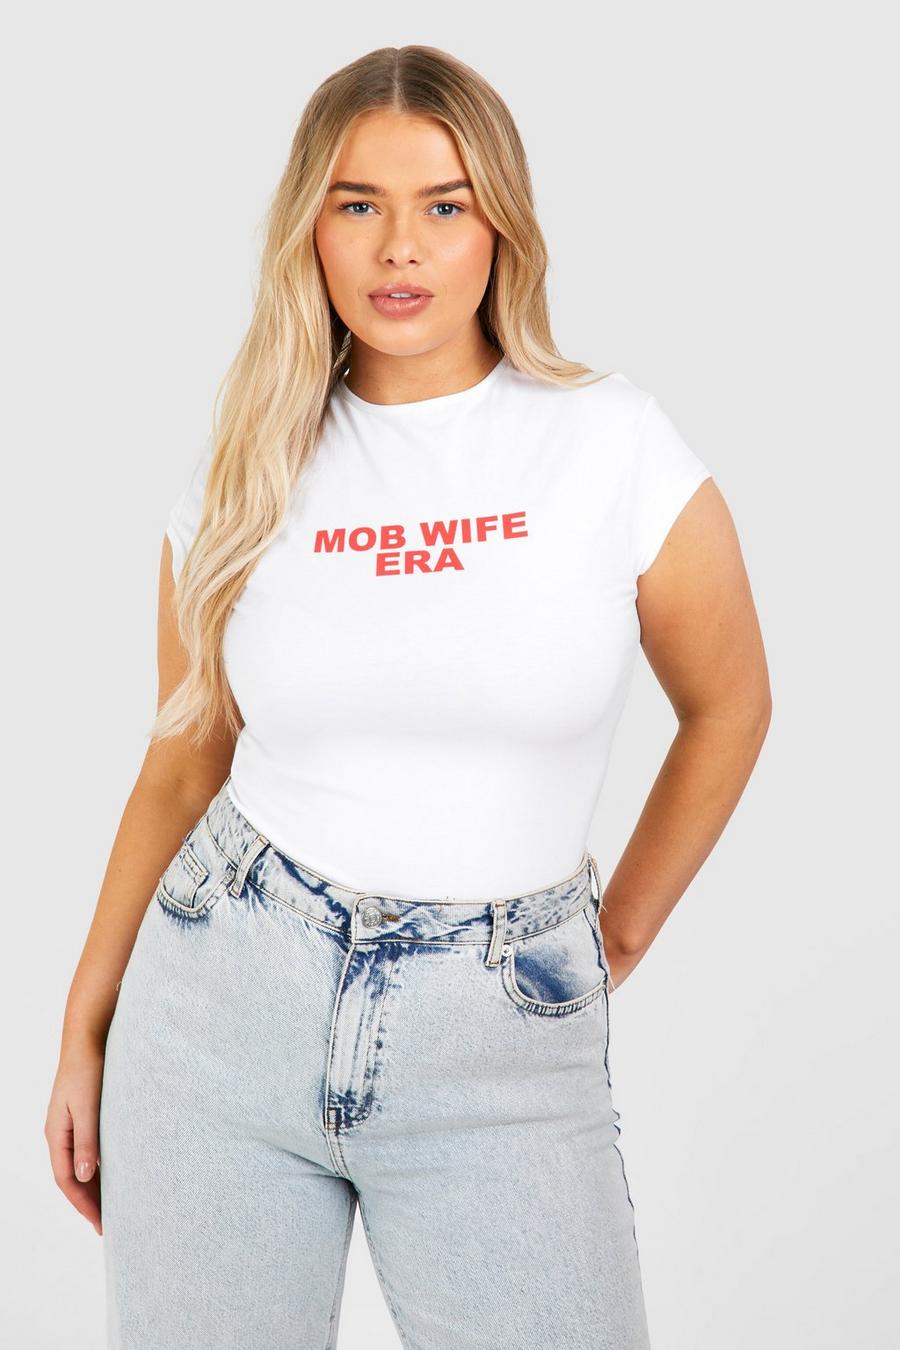 T-shirt Plus Size per neonato Mob Wife, White image number 1